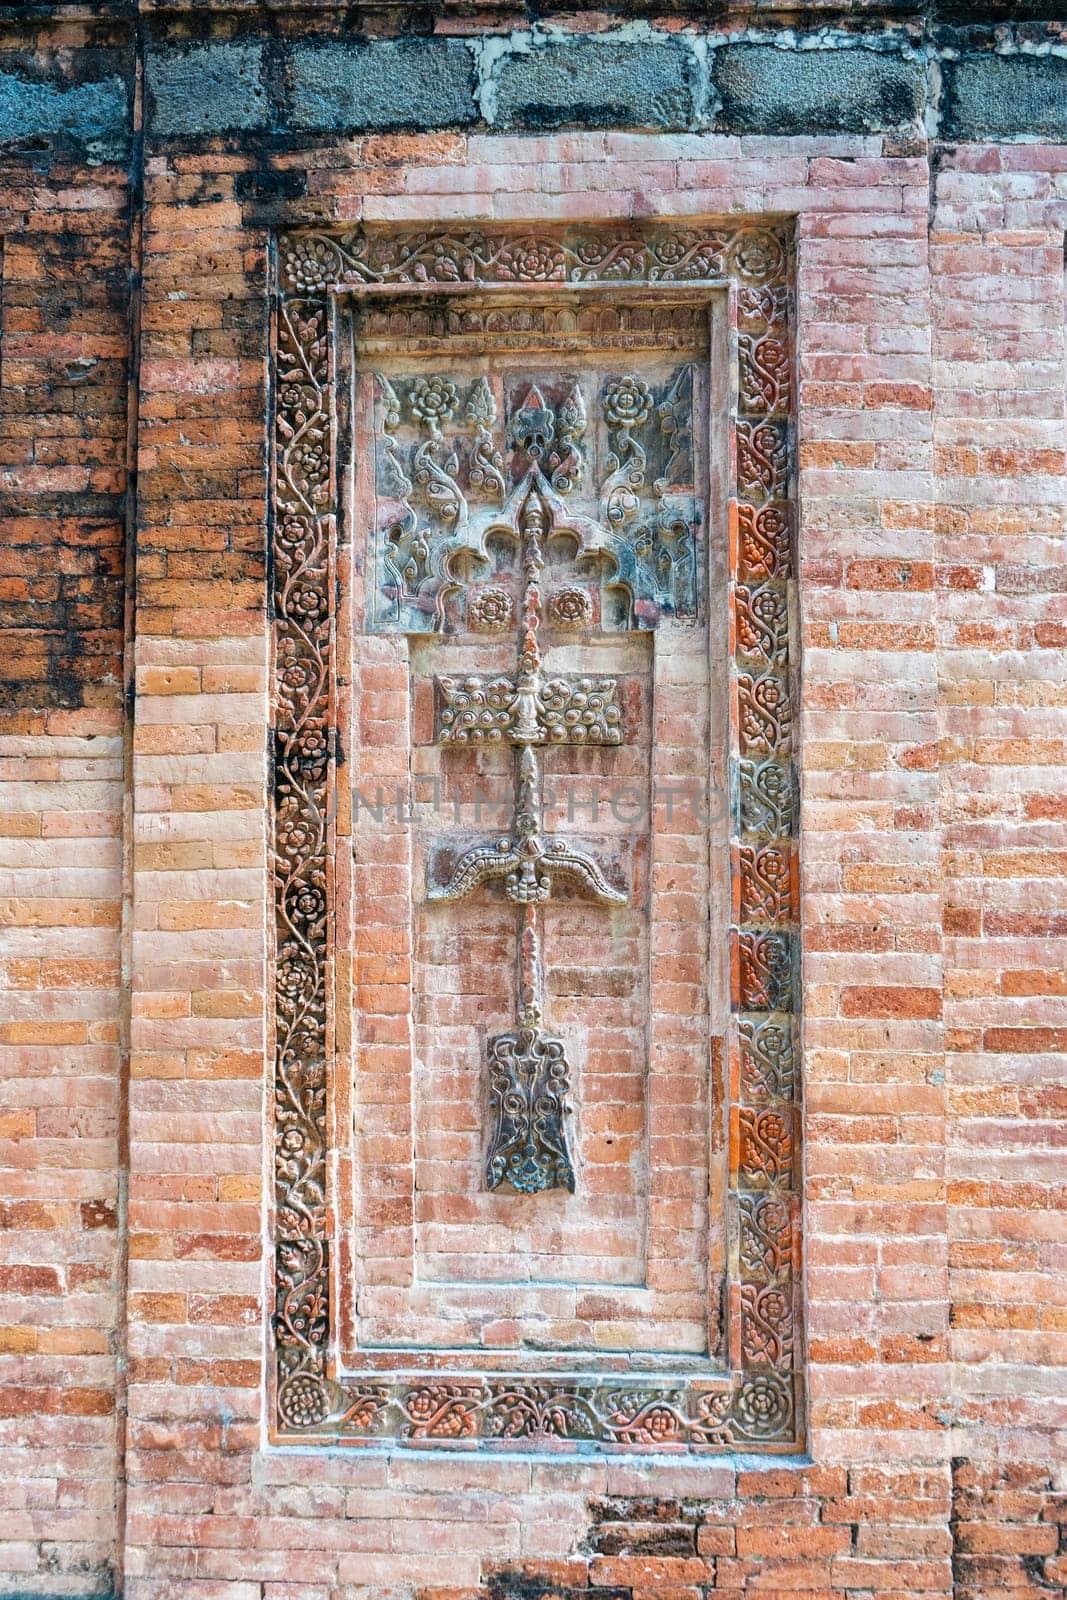 Terracotta patterns ancient stone carving, pattern on stone wall of Bagha Shahi Mosque by paca-waca